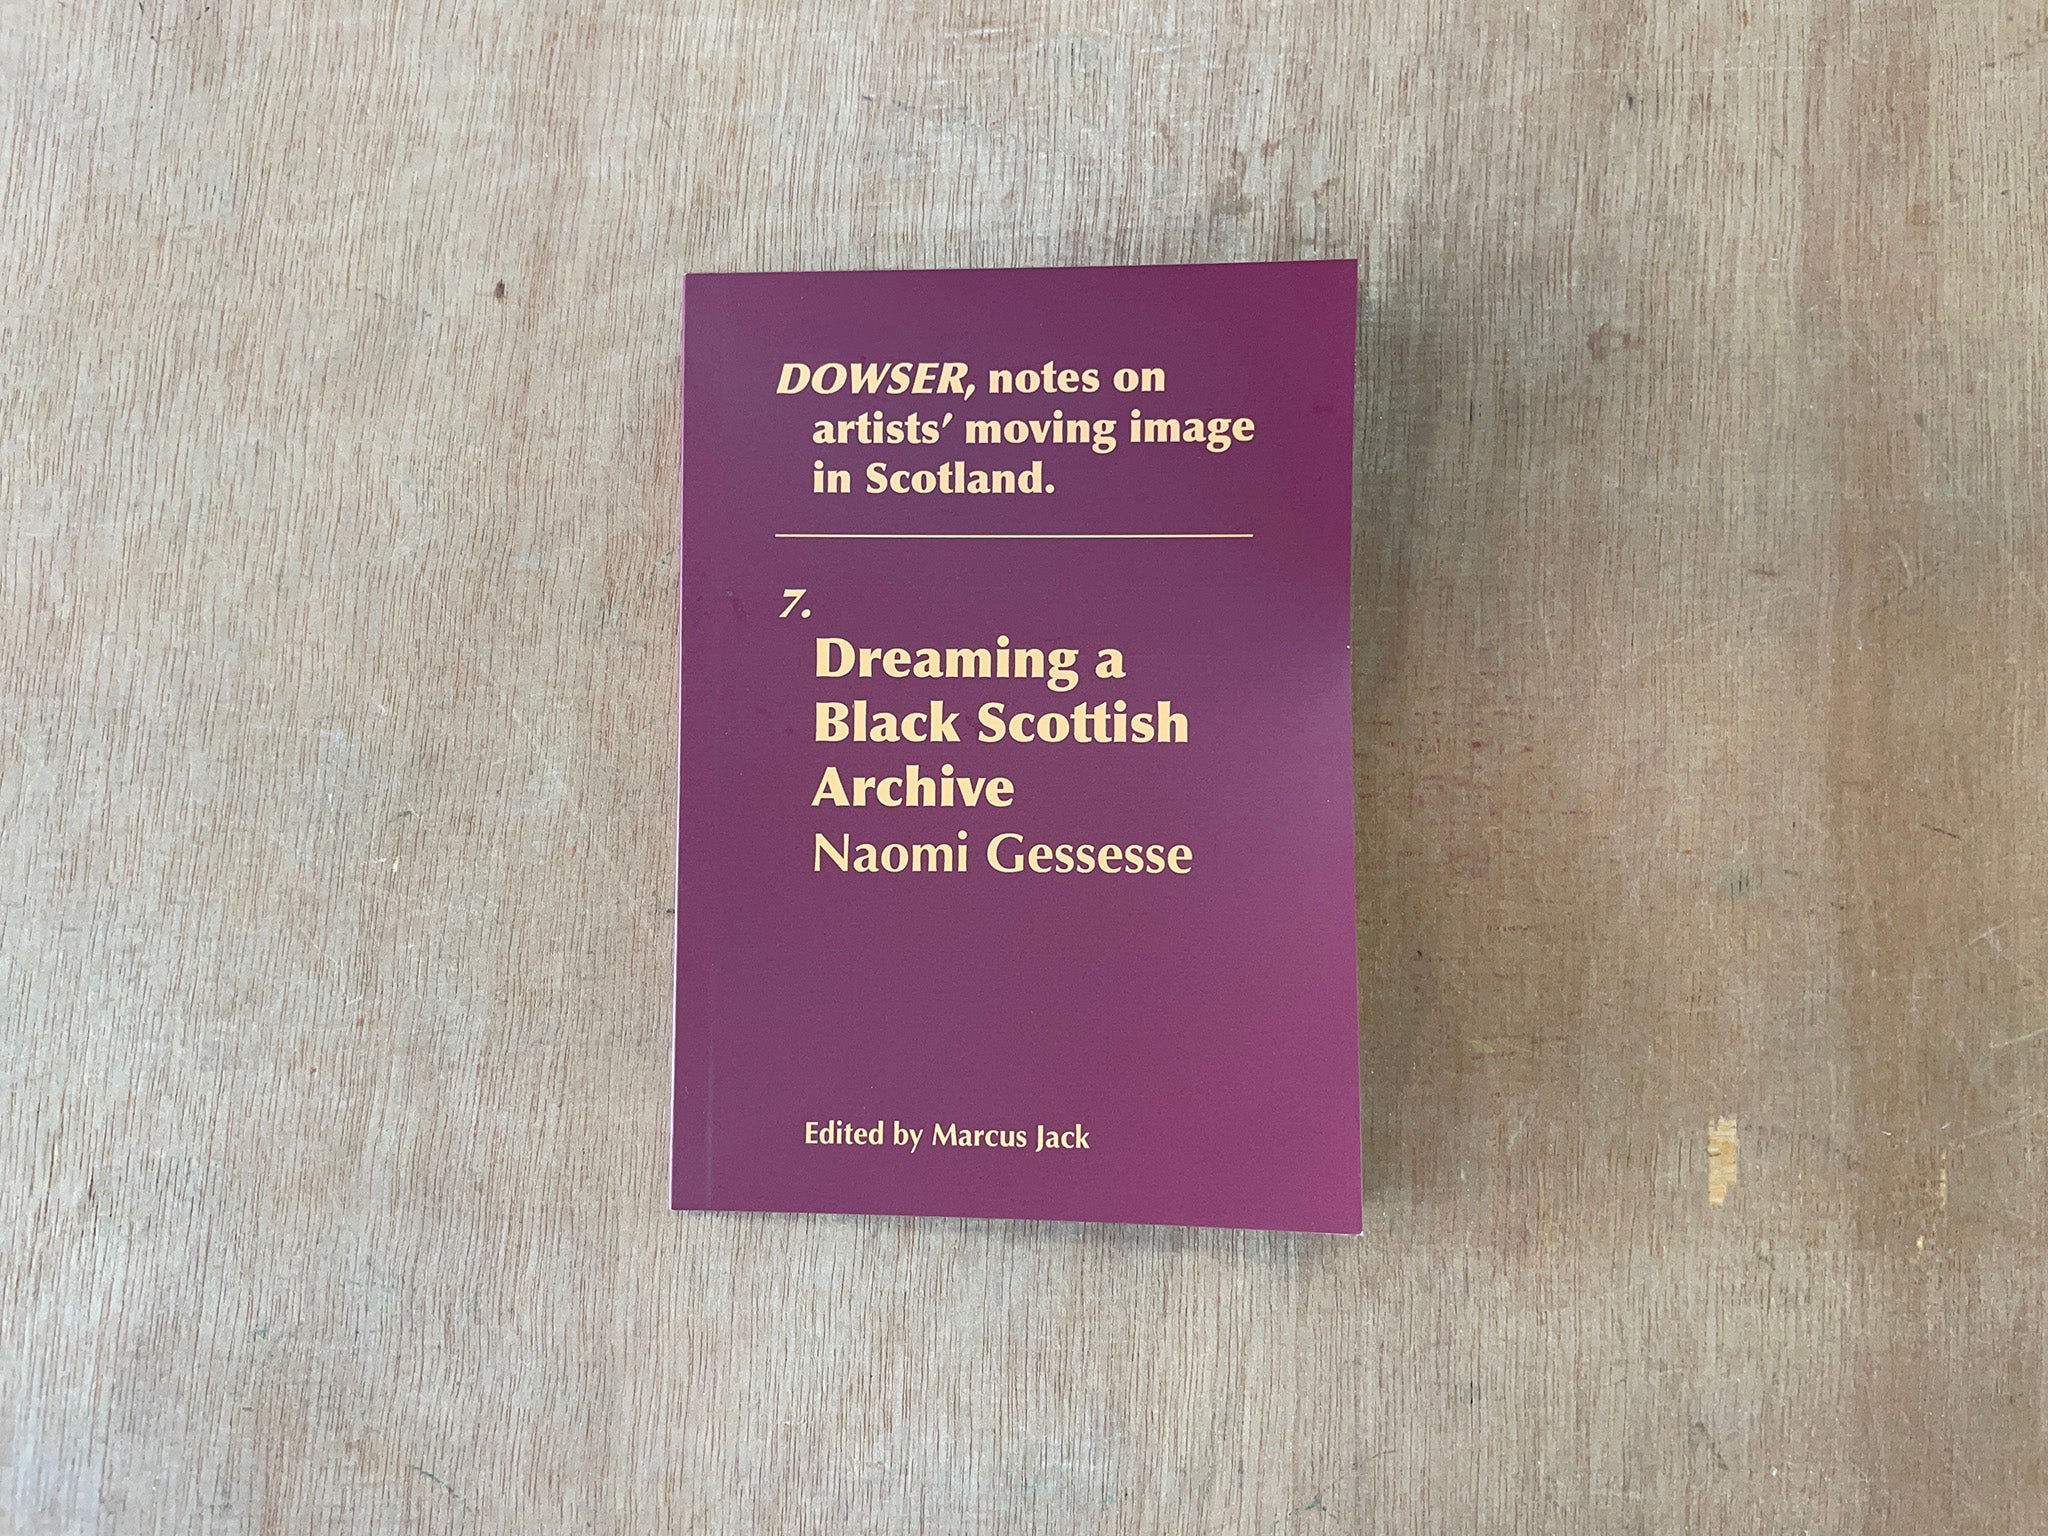 DOWSER ISSUE 7: DREAMING A BLACK SCOTTISH ARCHIVE by Naomi Gessesse